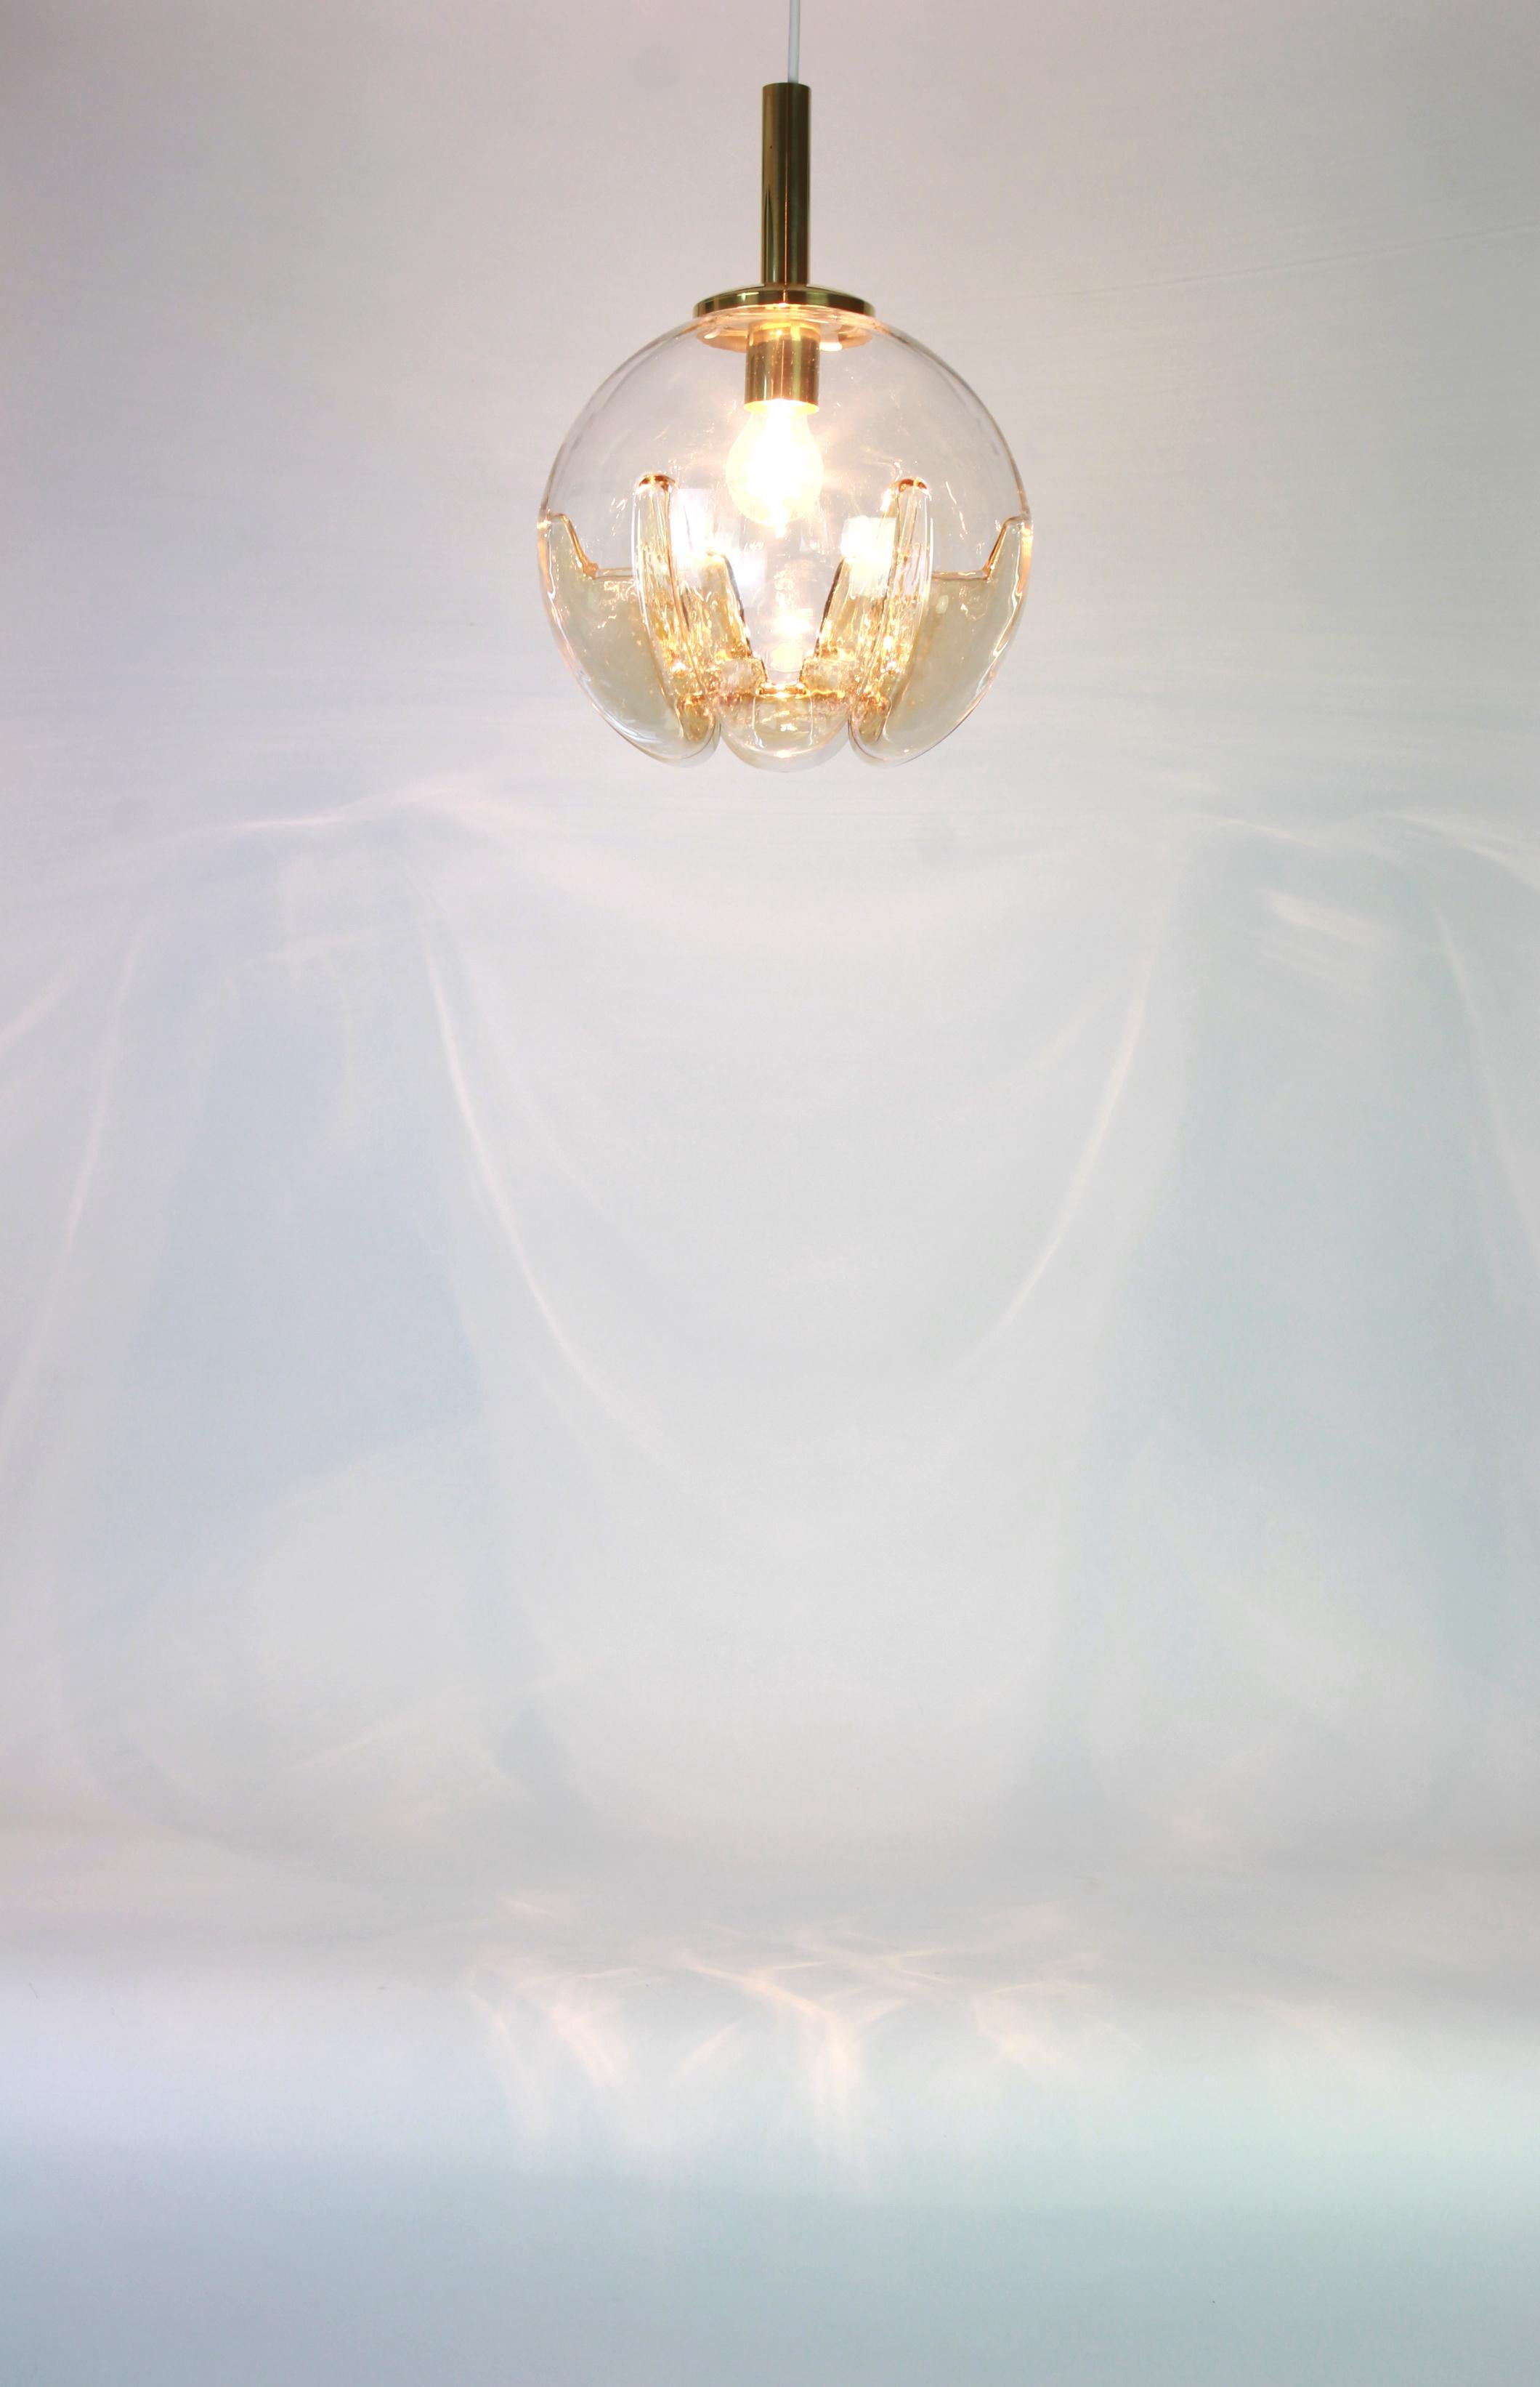 Doria ceiling light with large volcanic Murano glass ball.
High quality of materials - gives a wonderful light effect when it is on.

Heavy quality and in very good condition. Cleaned, well-wired and ready to use. The fixture requires one E27